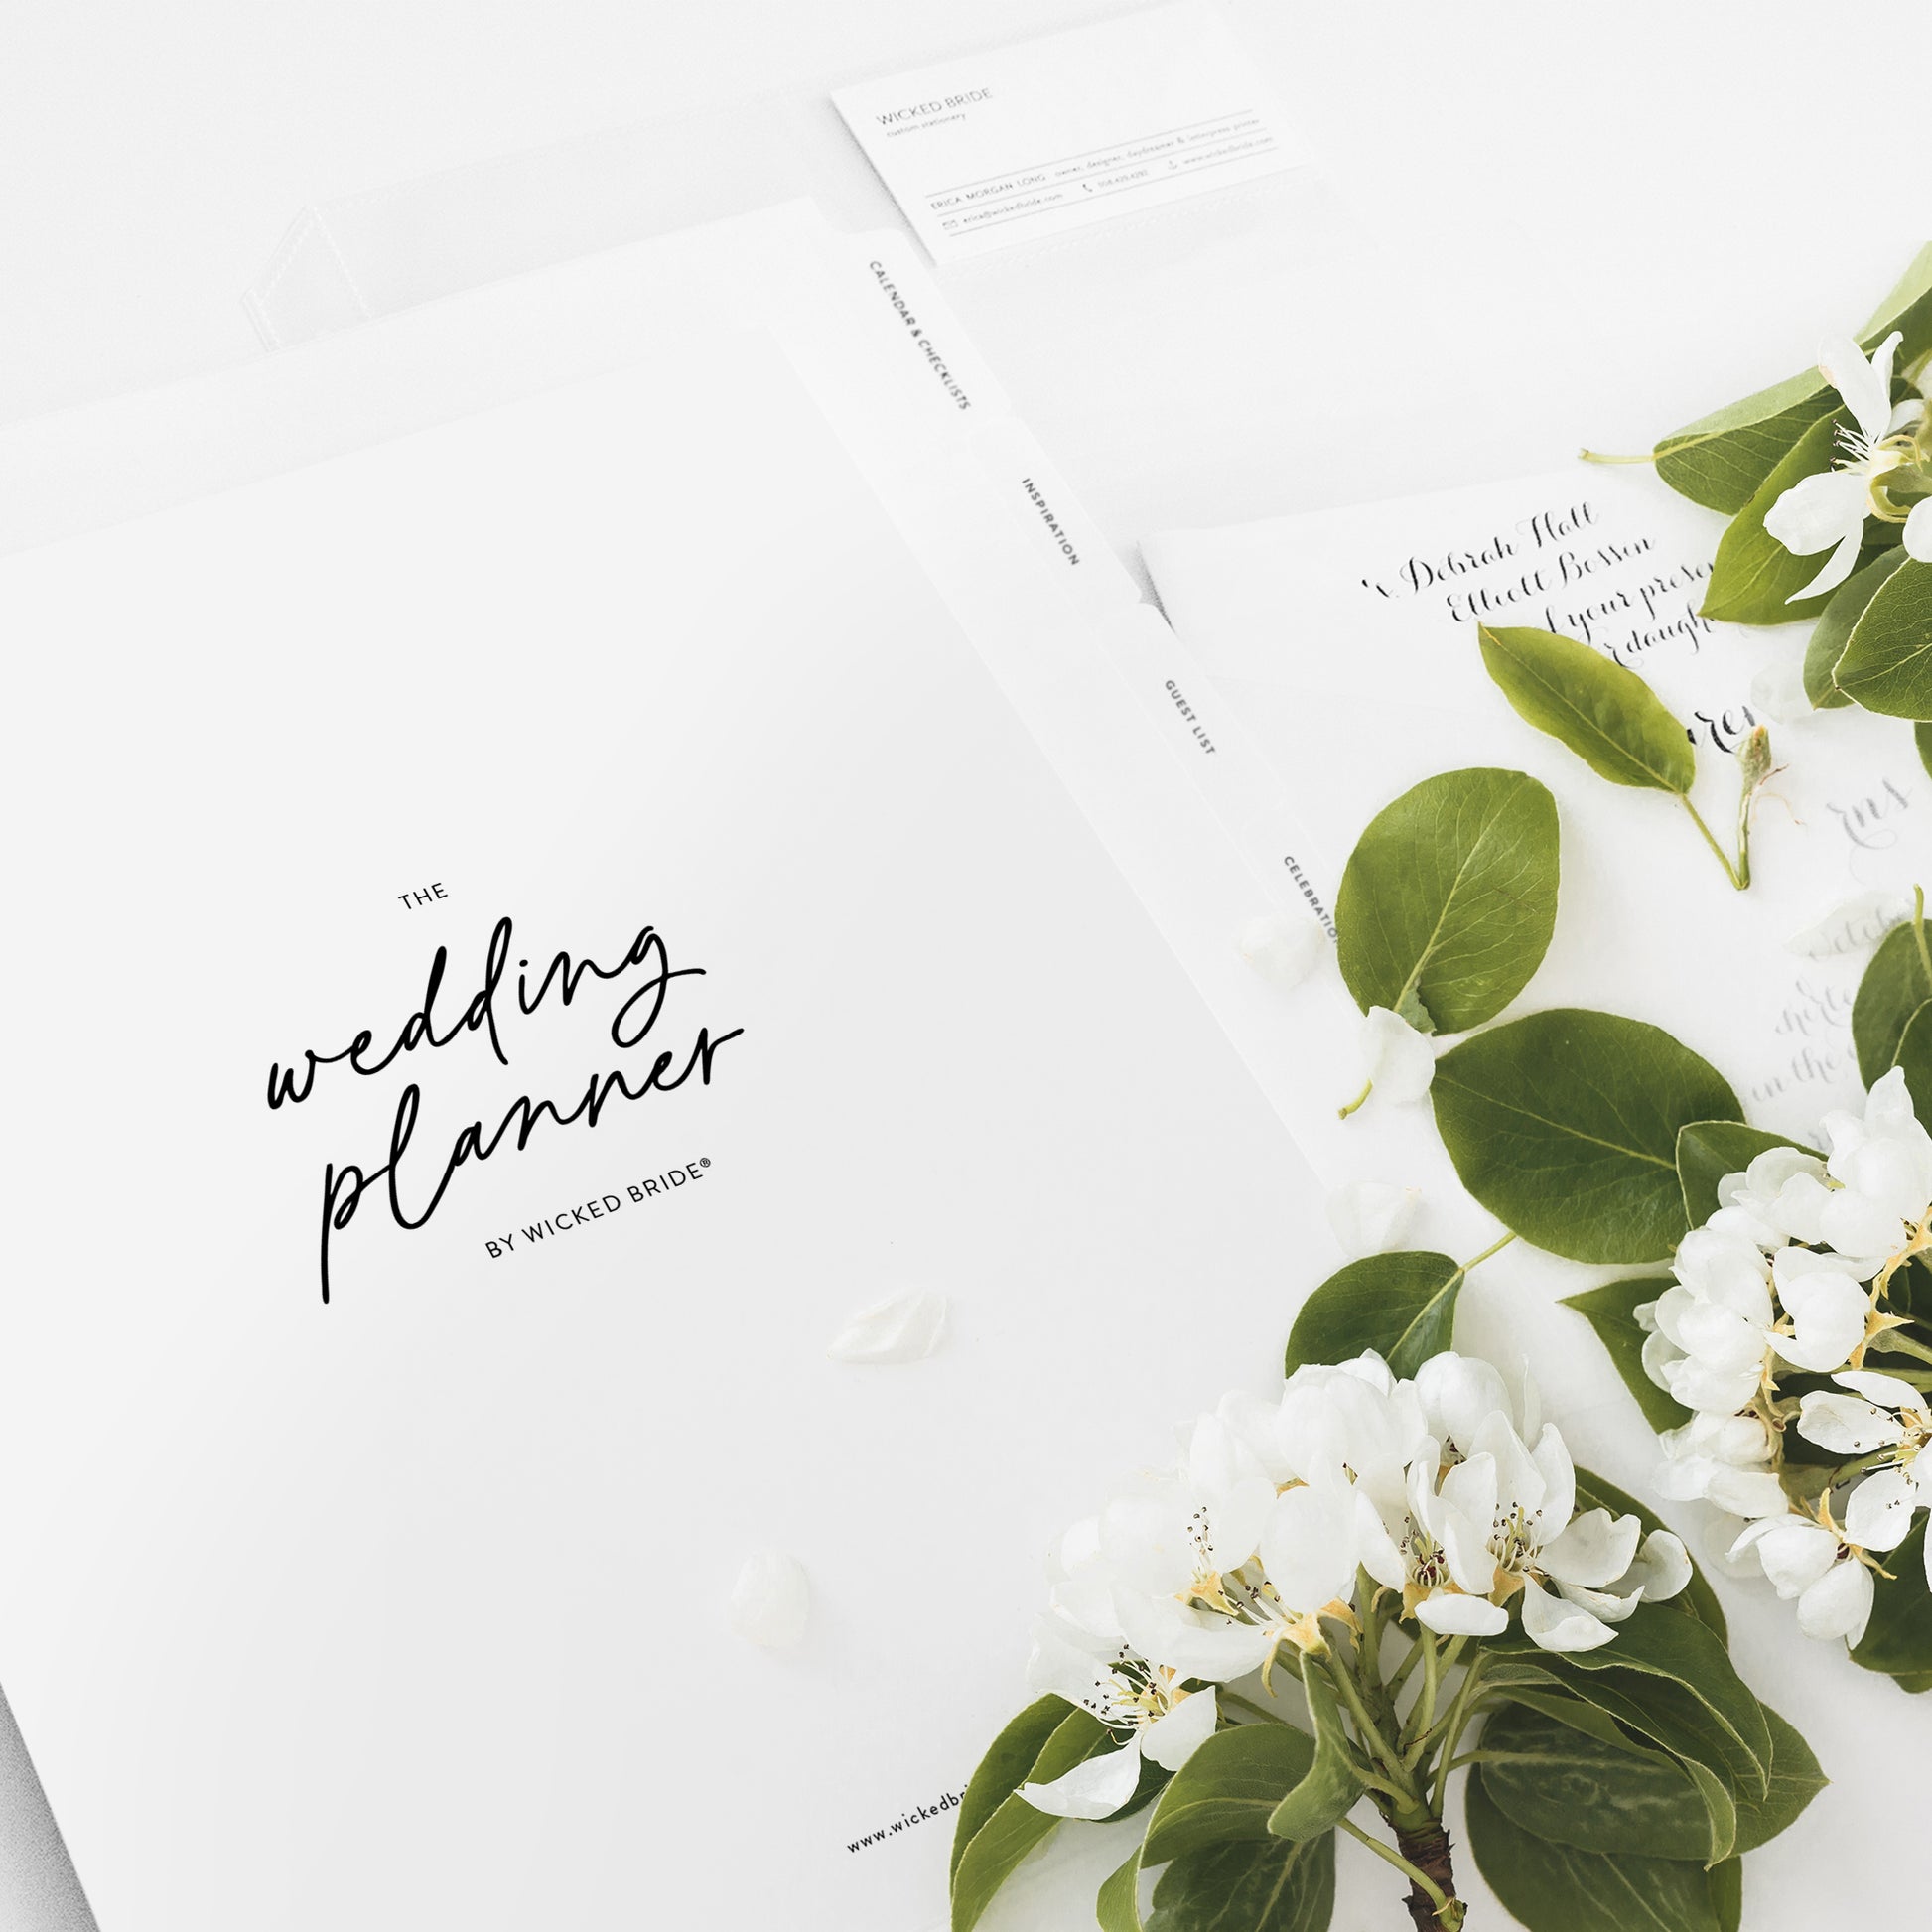 Wedding planning binder kit includes over 100 printed pages, 10 index tabs, a business card page and plastic binder pocket